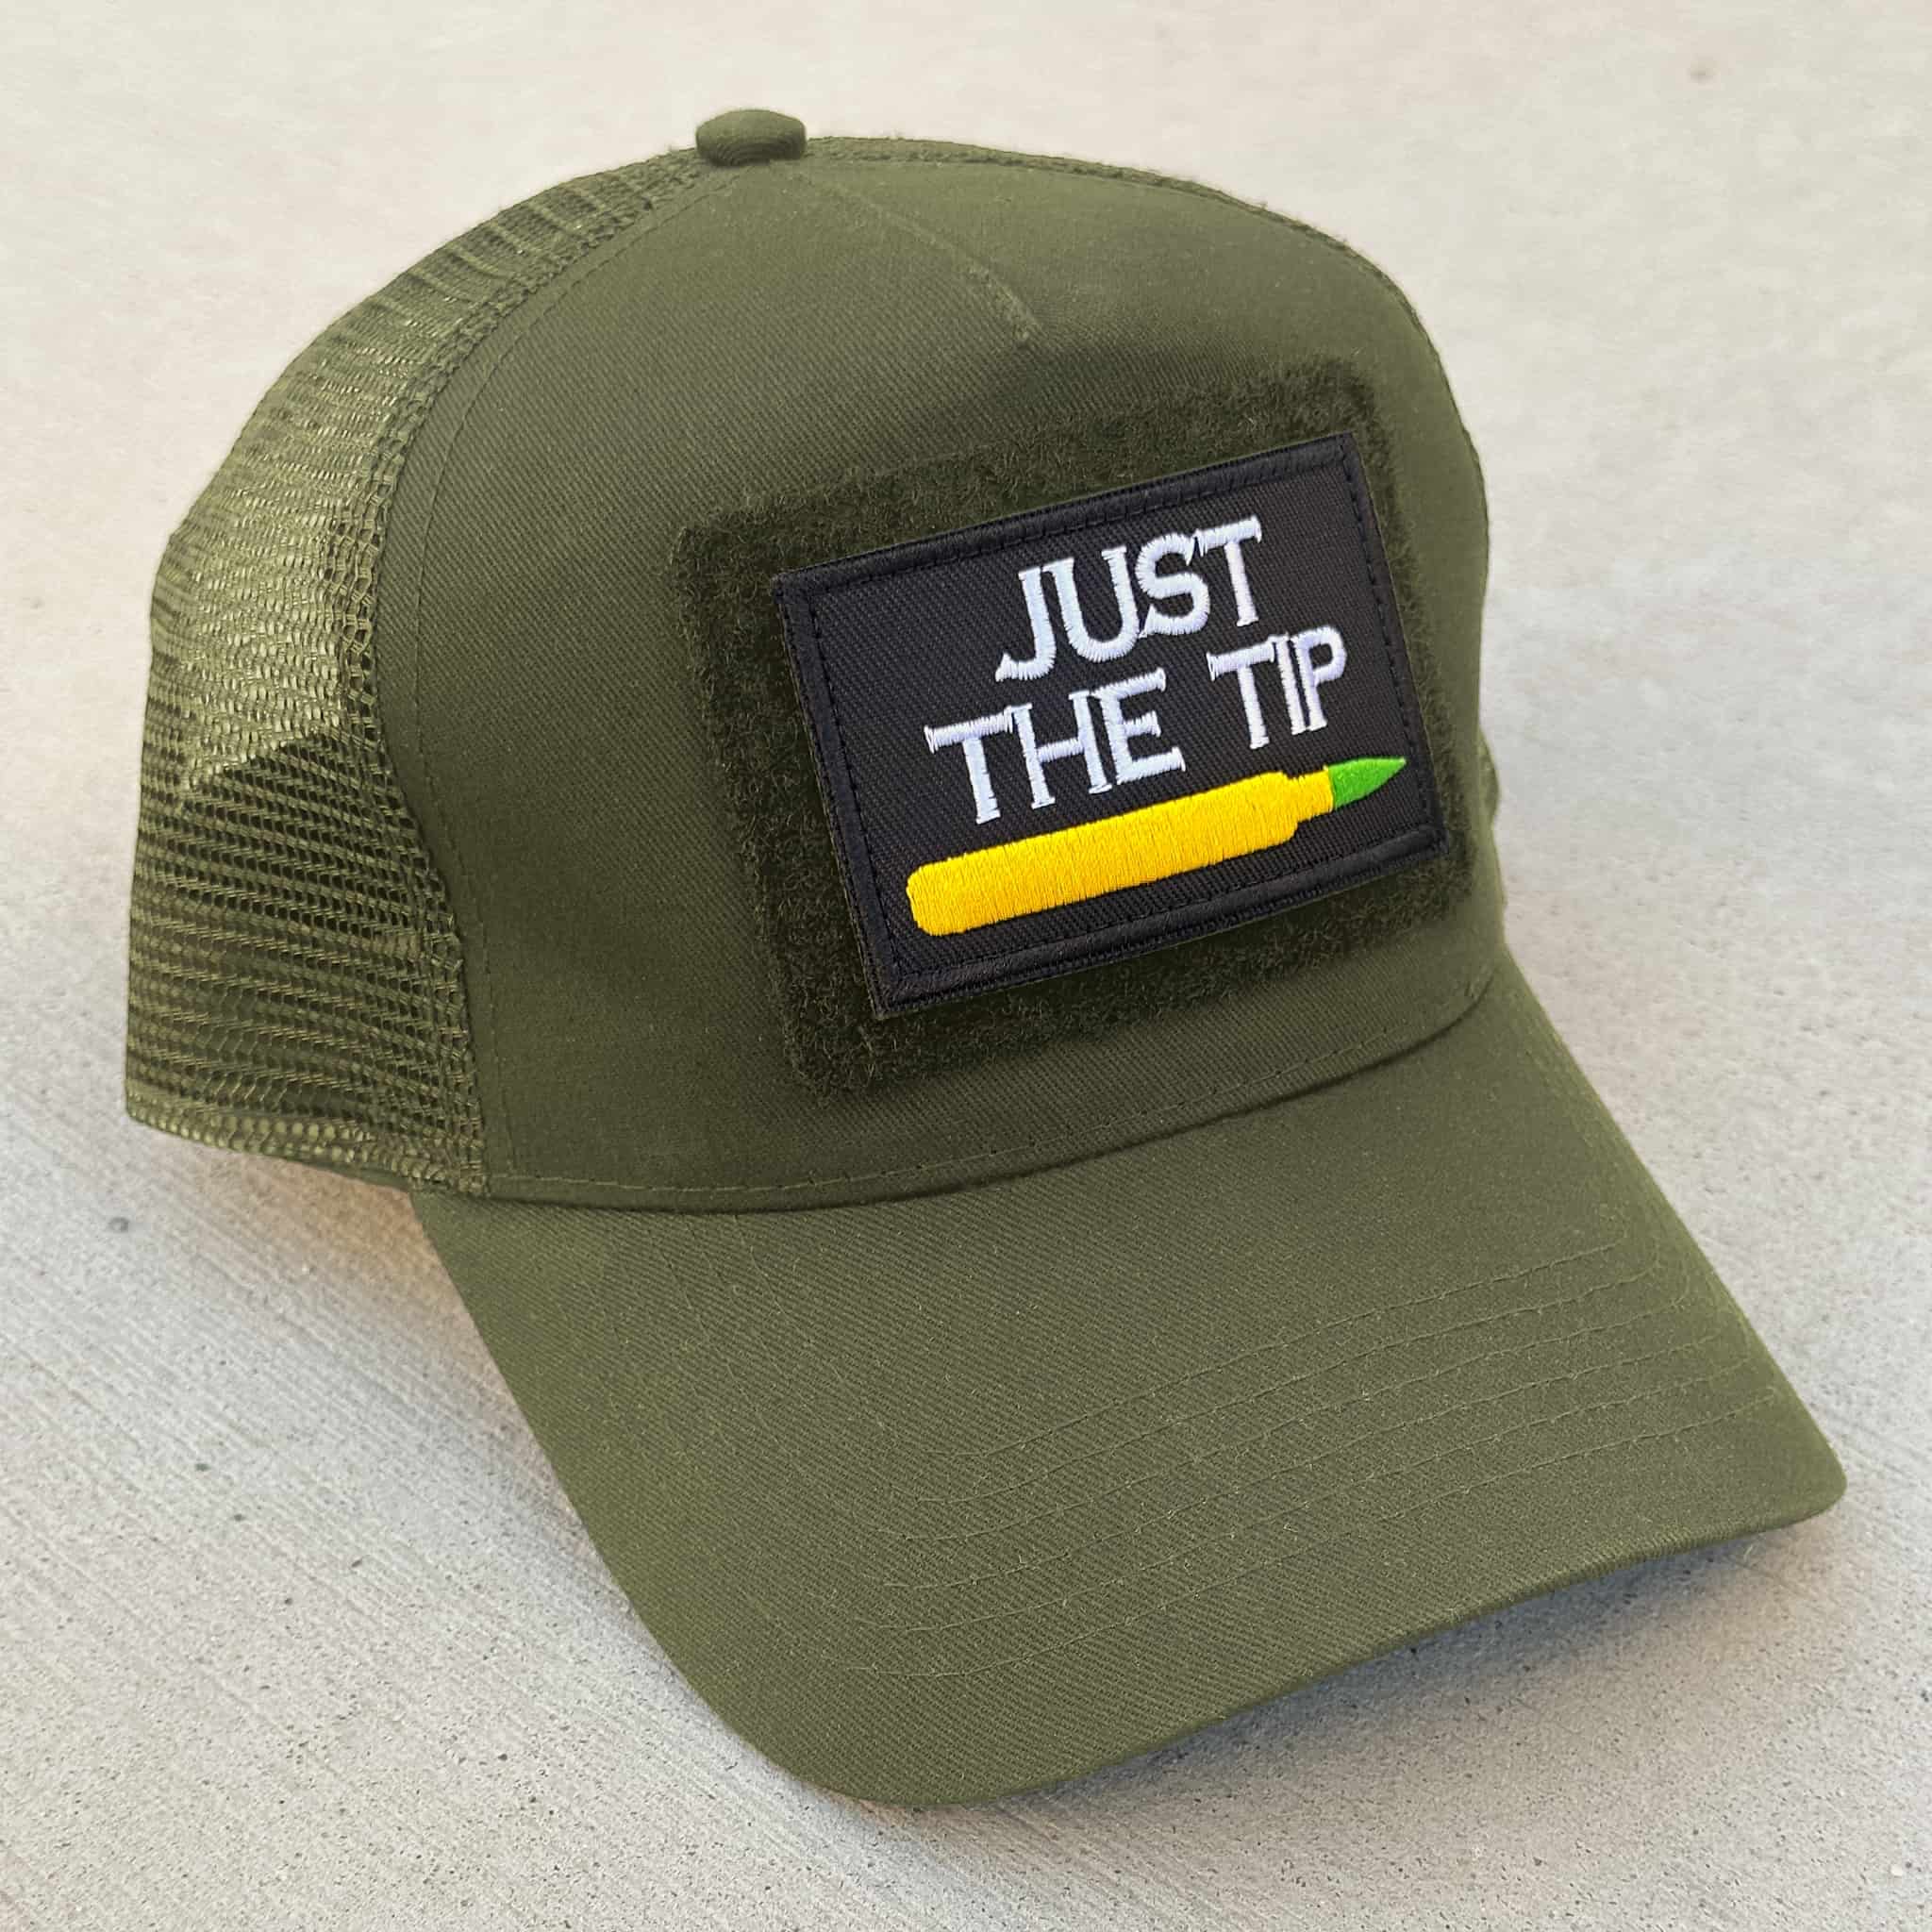 The Blank Canvas Snapback cap in military green color with the 'Just the Tip' patch attached